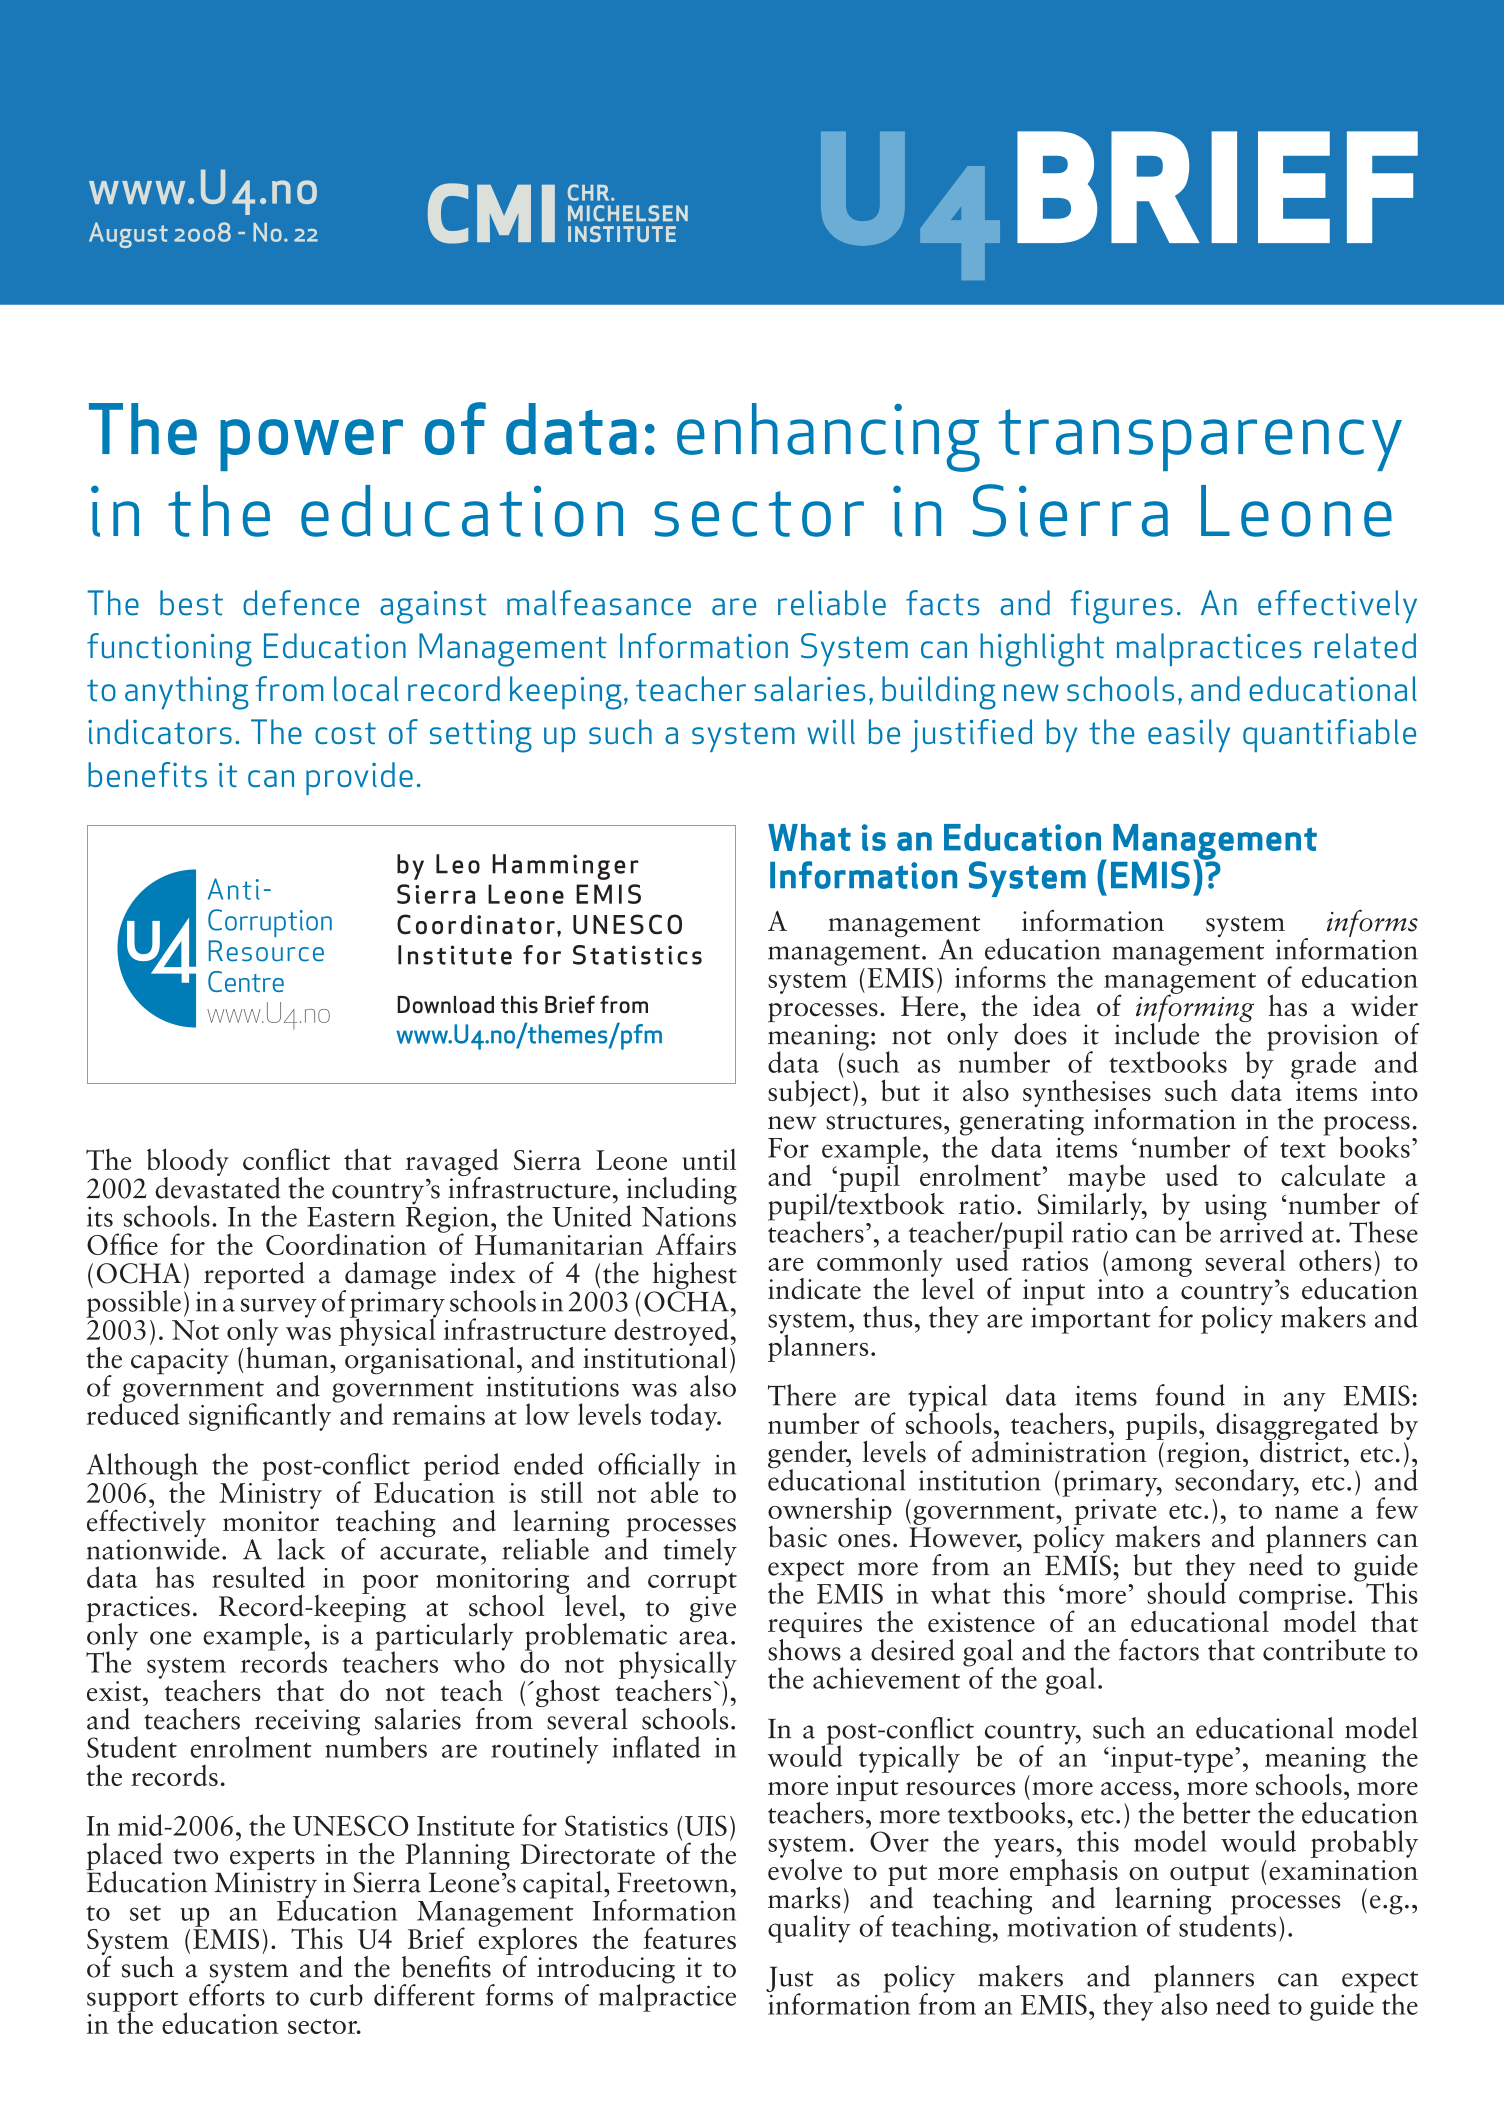 The power of data: Enhancing transparency in the education sector in Sierra Leone 